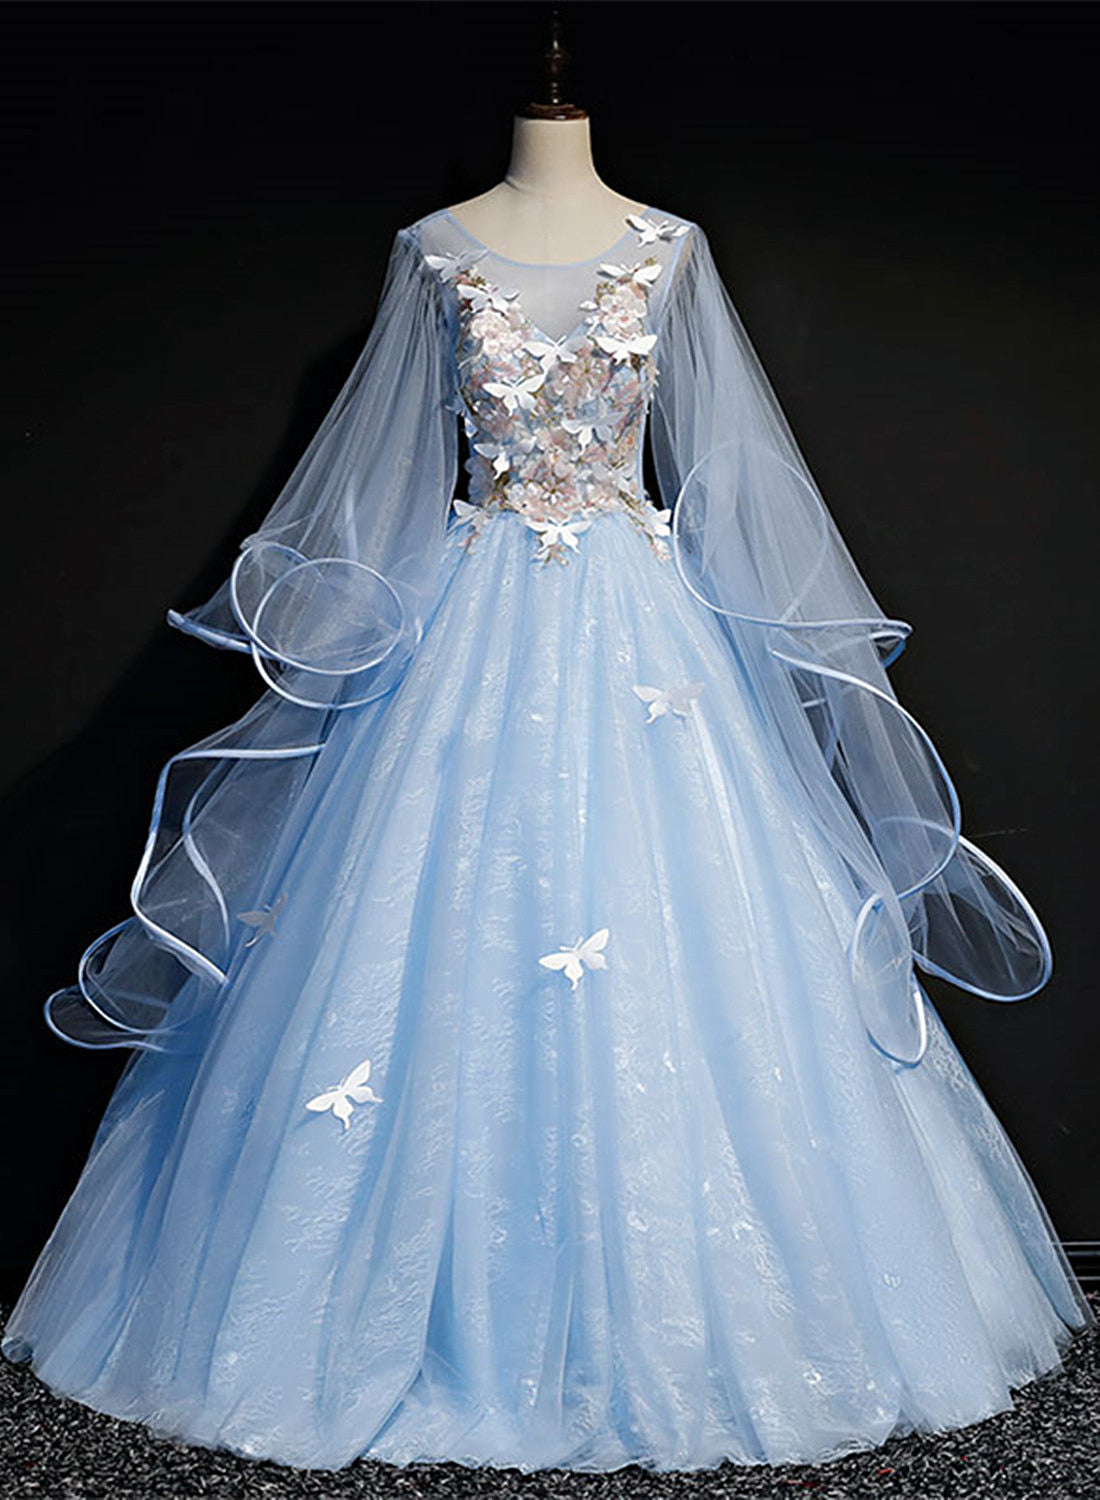 Light Blue with Flowers and Butterflies Formal Dress Outfits For Girls, Blue Sweet 16 Dresses